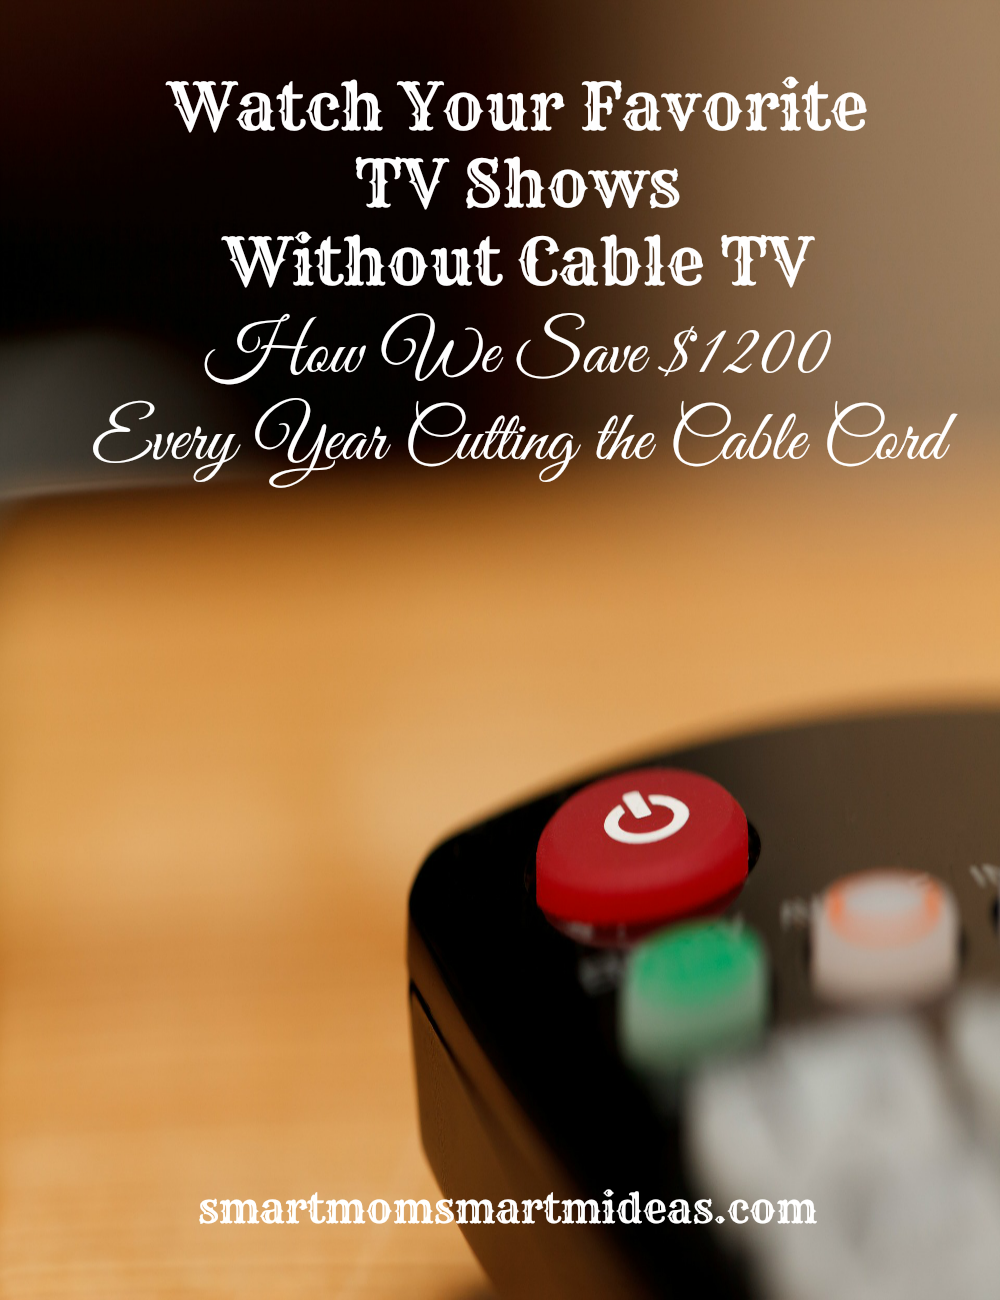 How to watch your favorite tv shows without cable and save $1,200 or more every year!